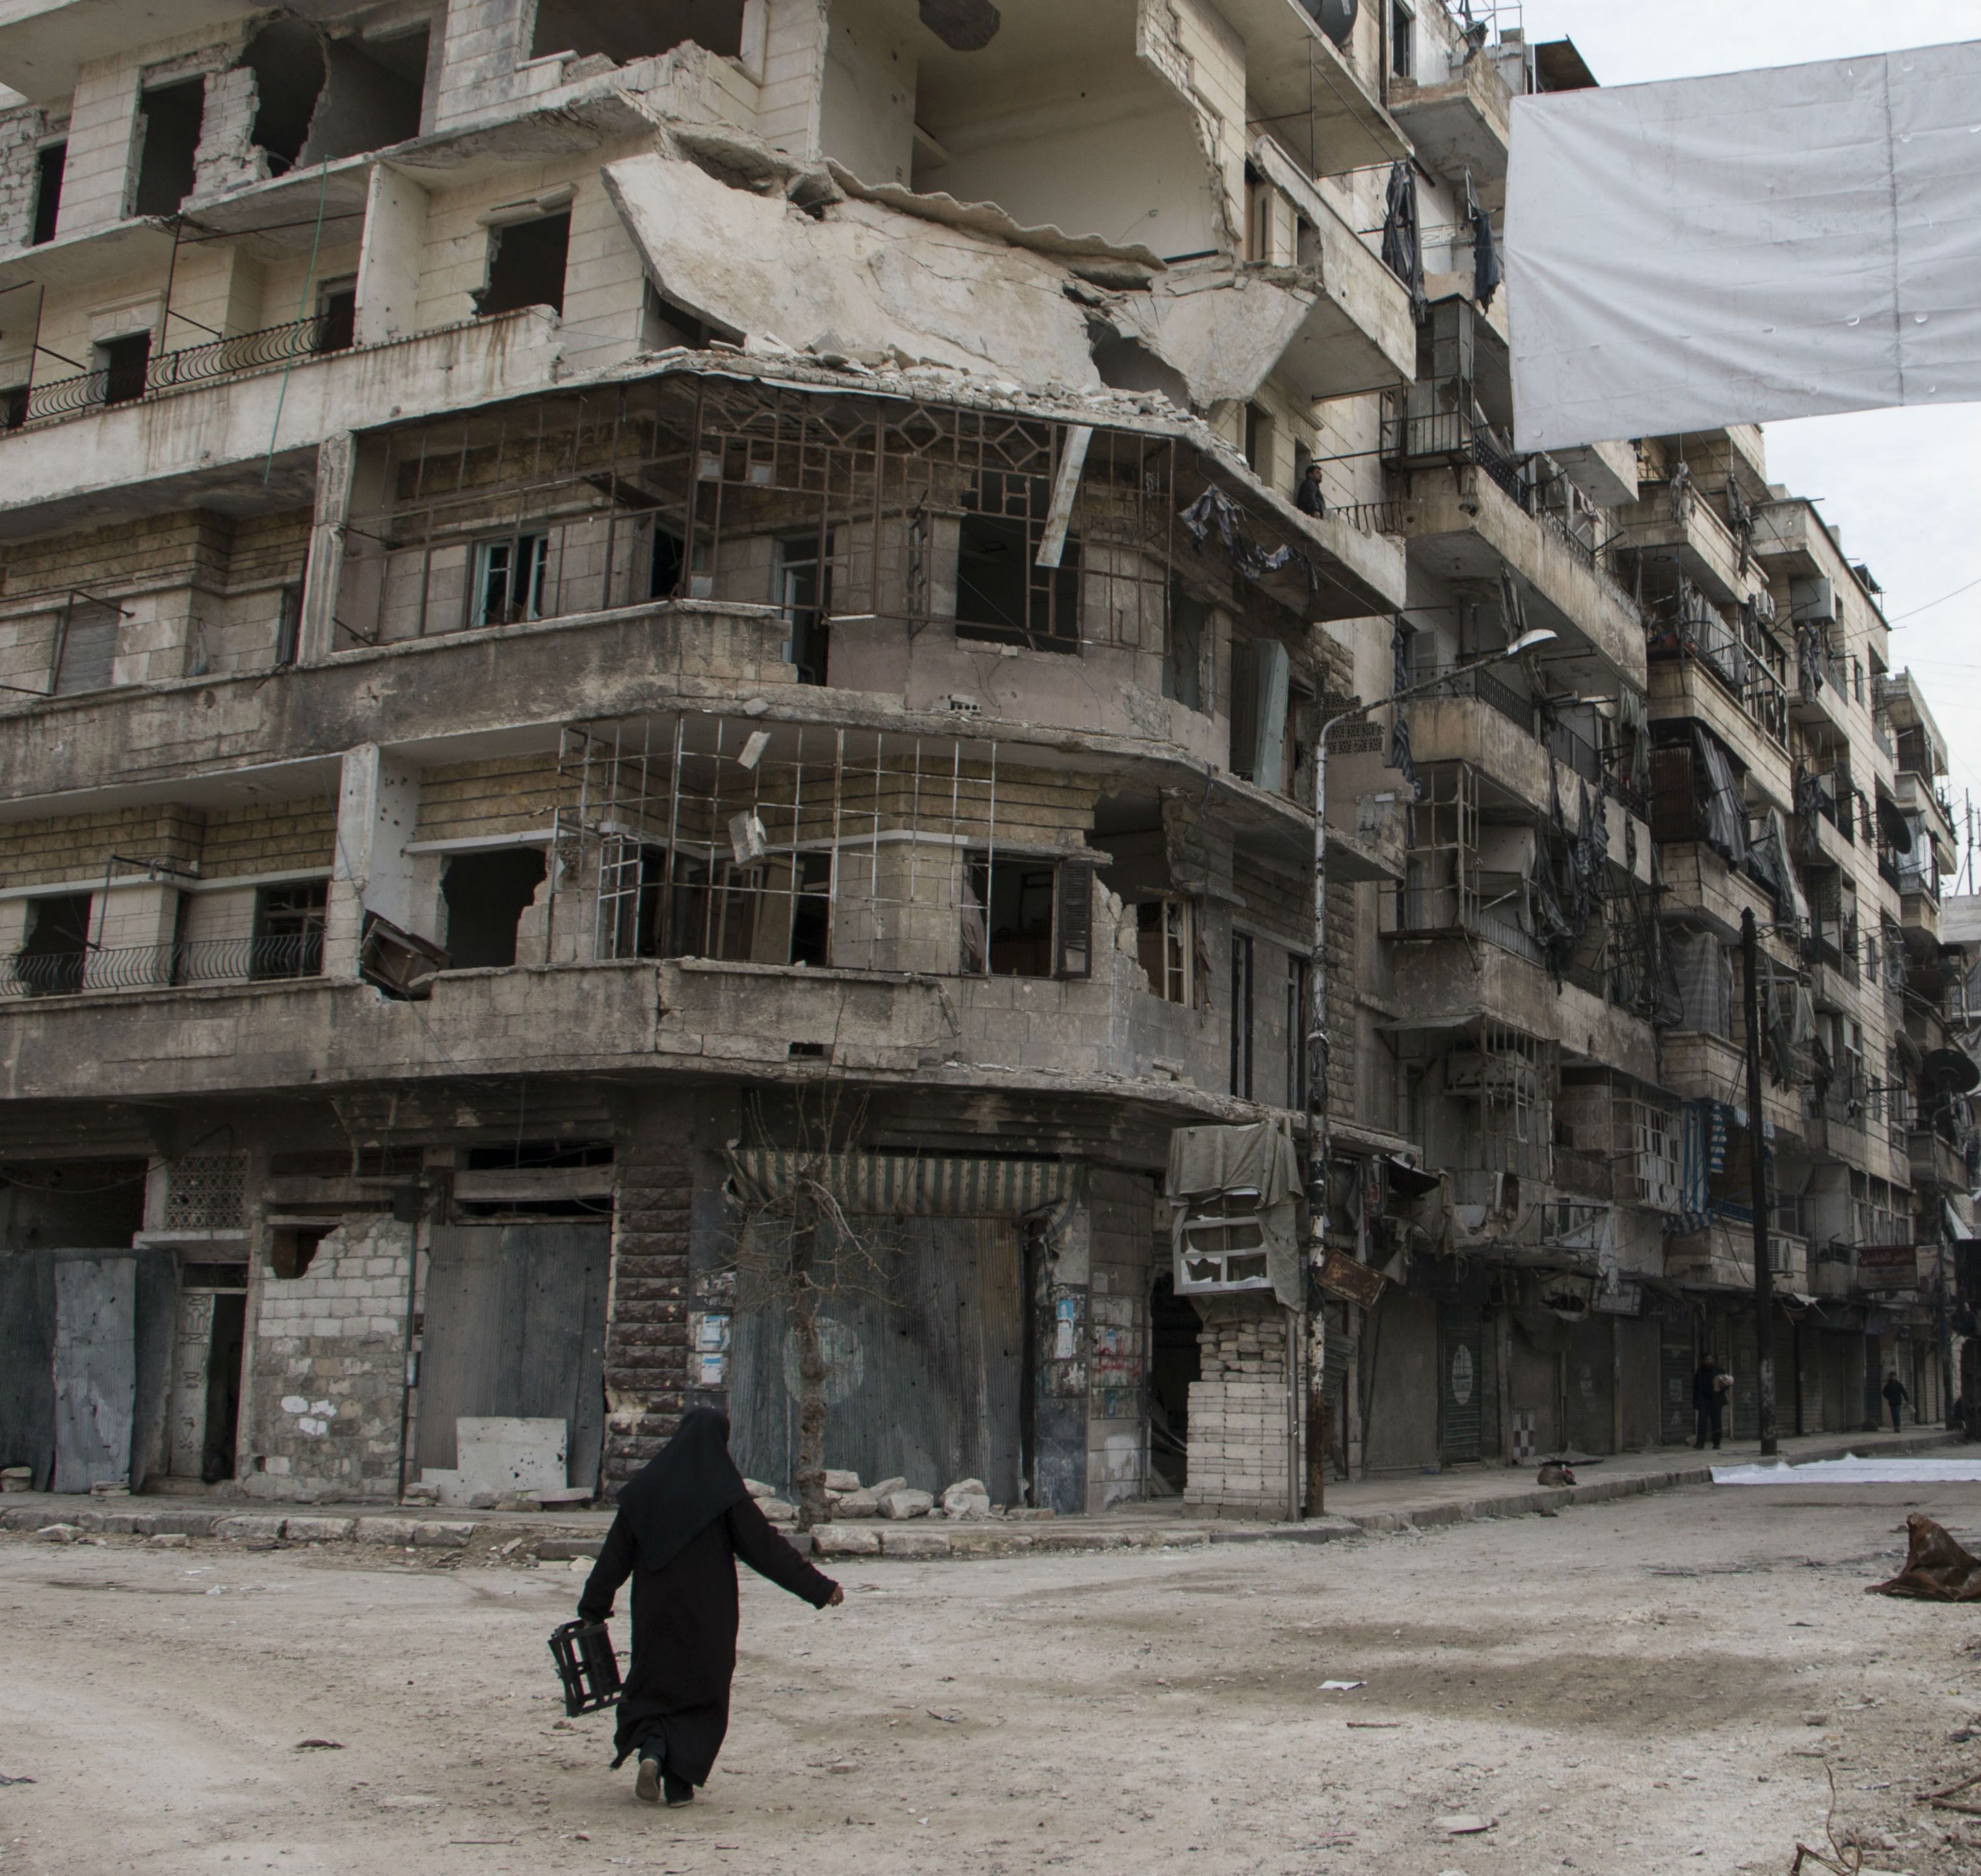 Embattled nuns in Aleppo appeal for prayers and support